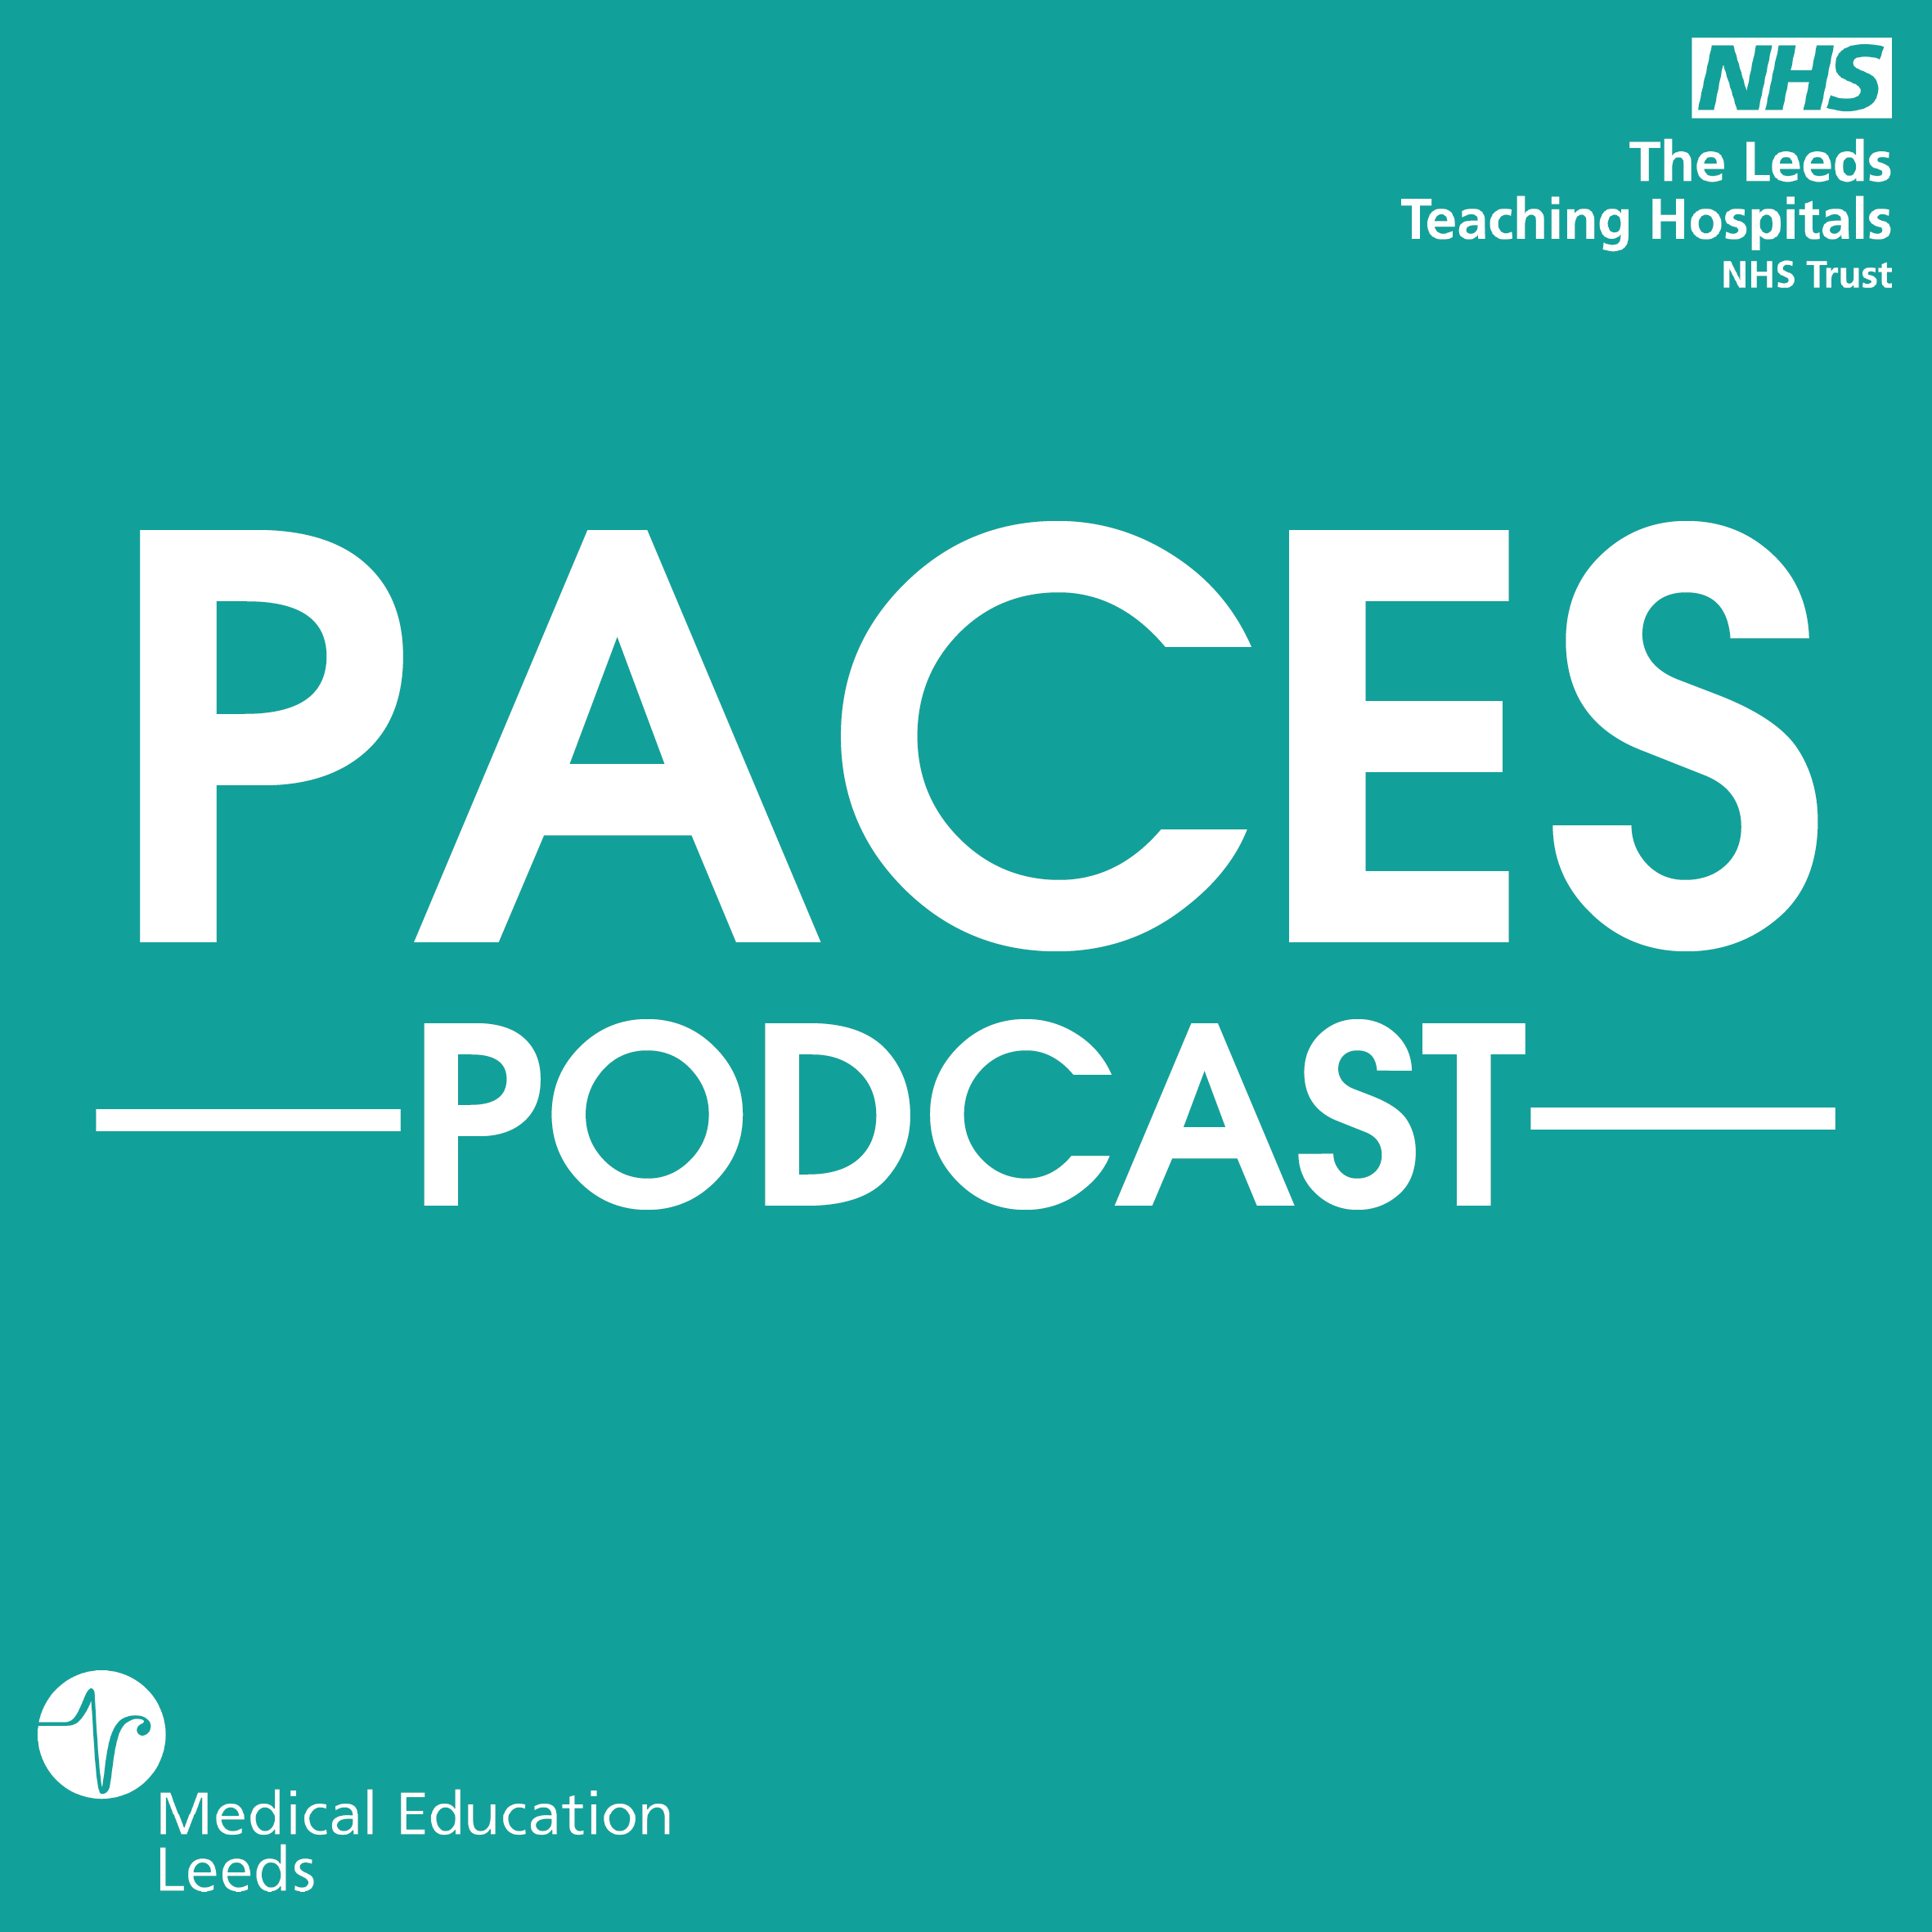 PACES Podcast Image